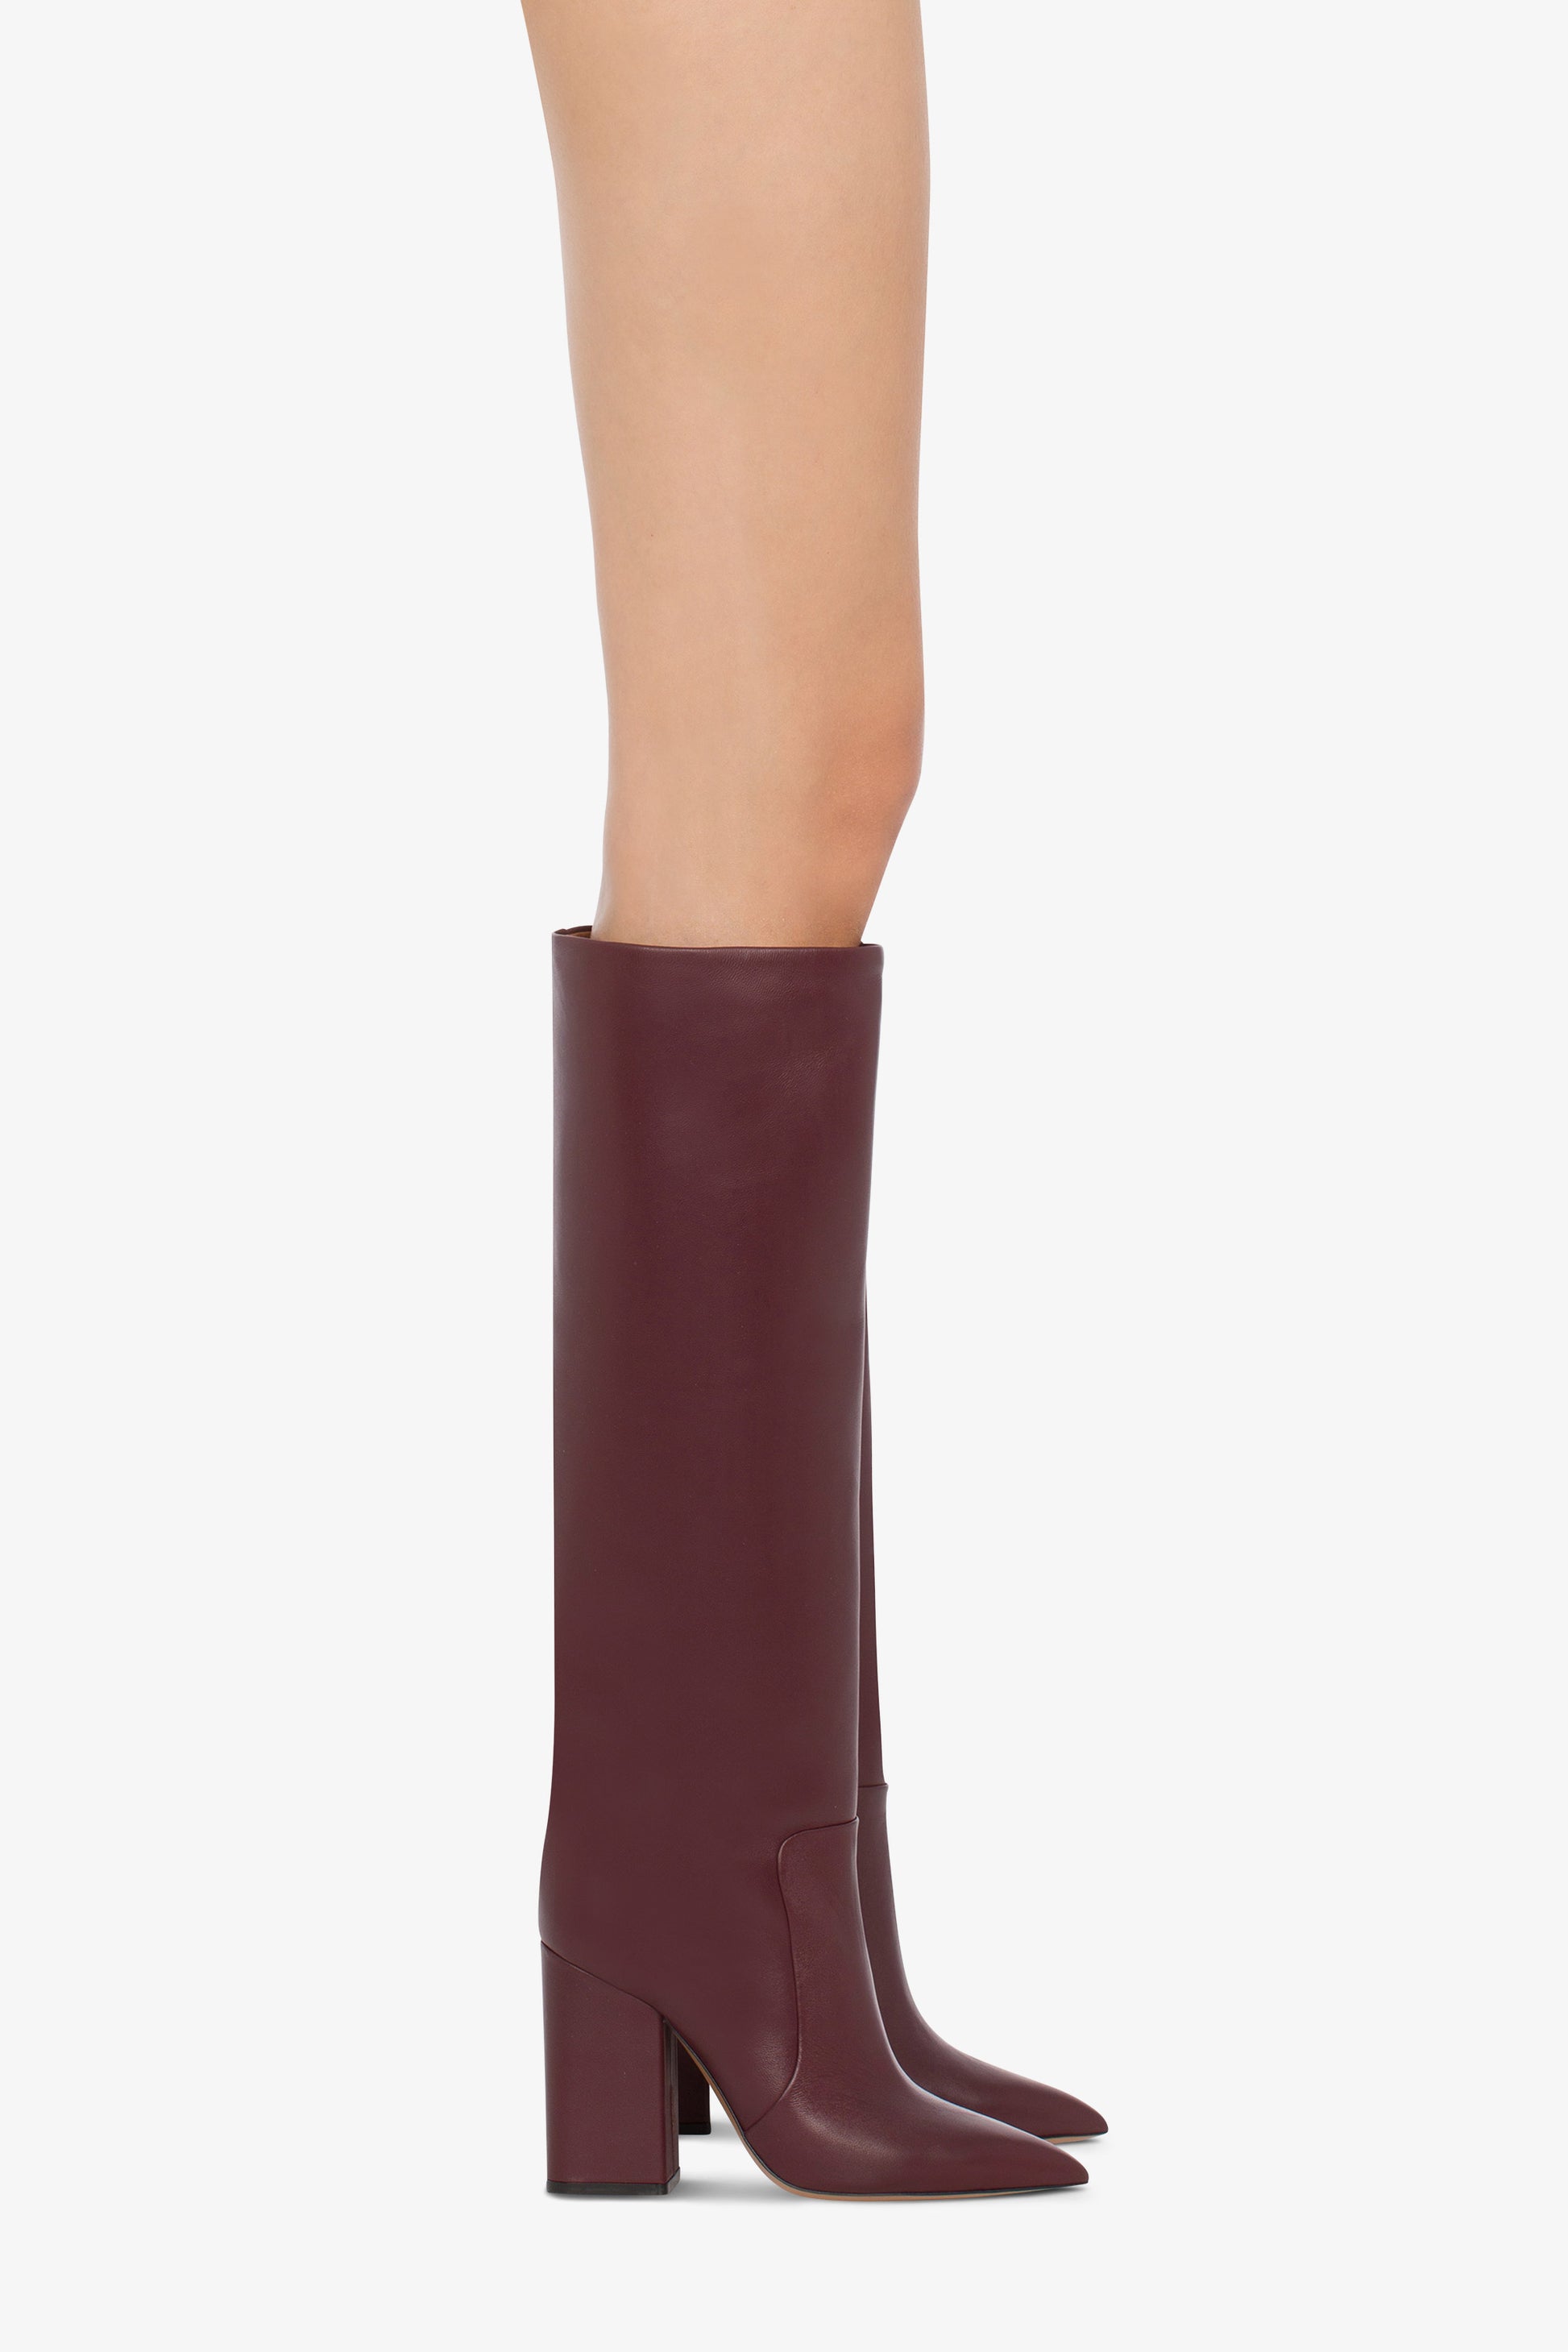 Knee-high boots in smooth burgundy leather - Product worn